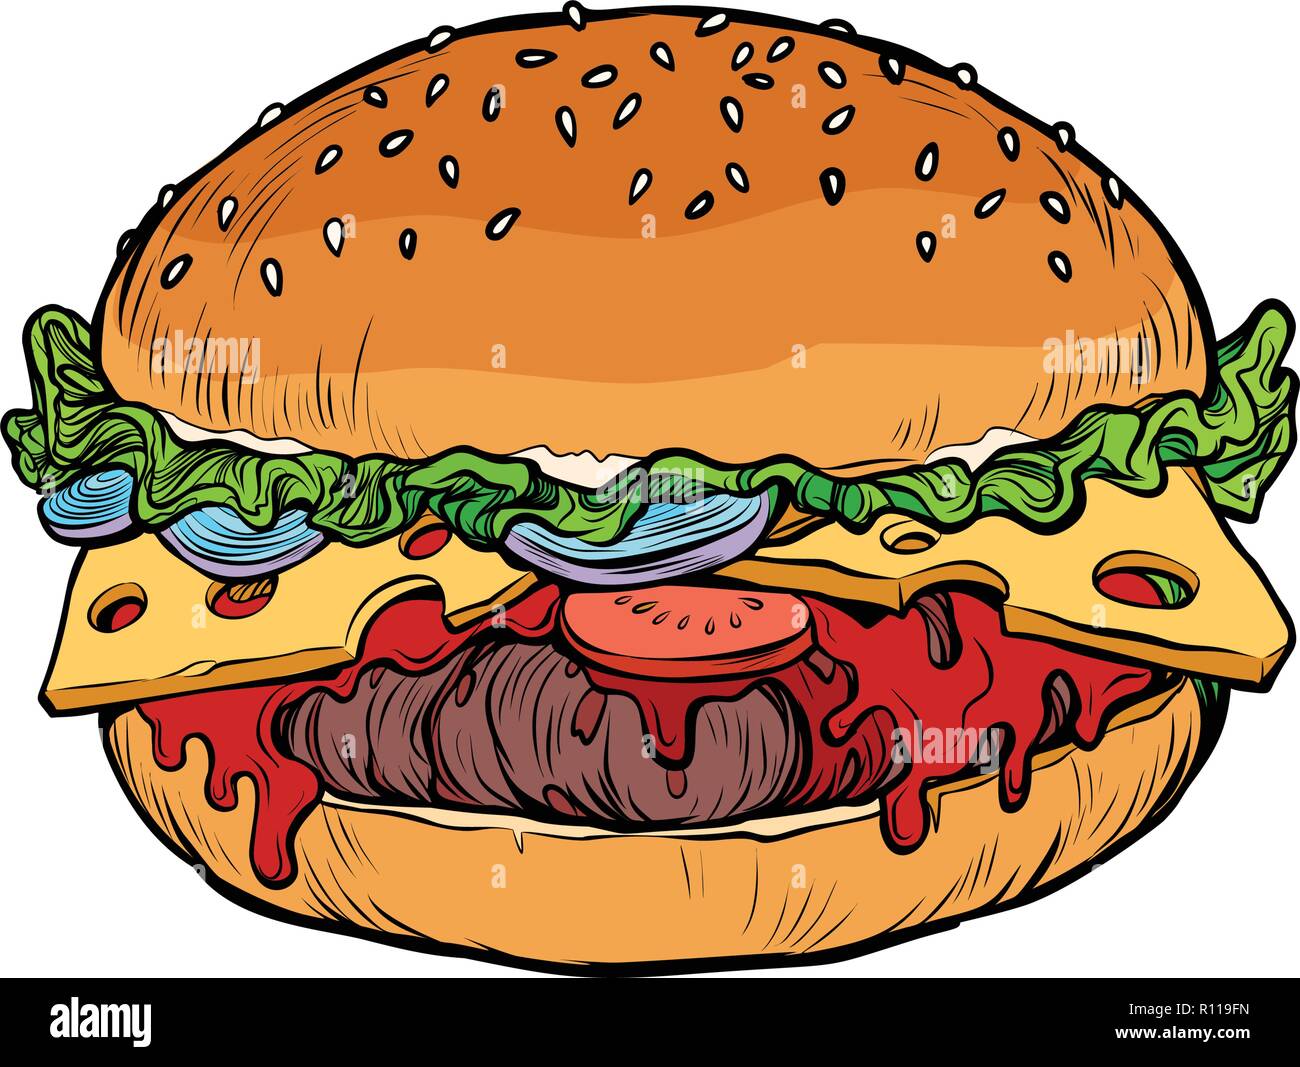 Burger, isolate on white background Stock Vector